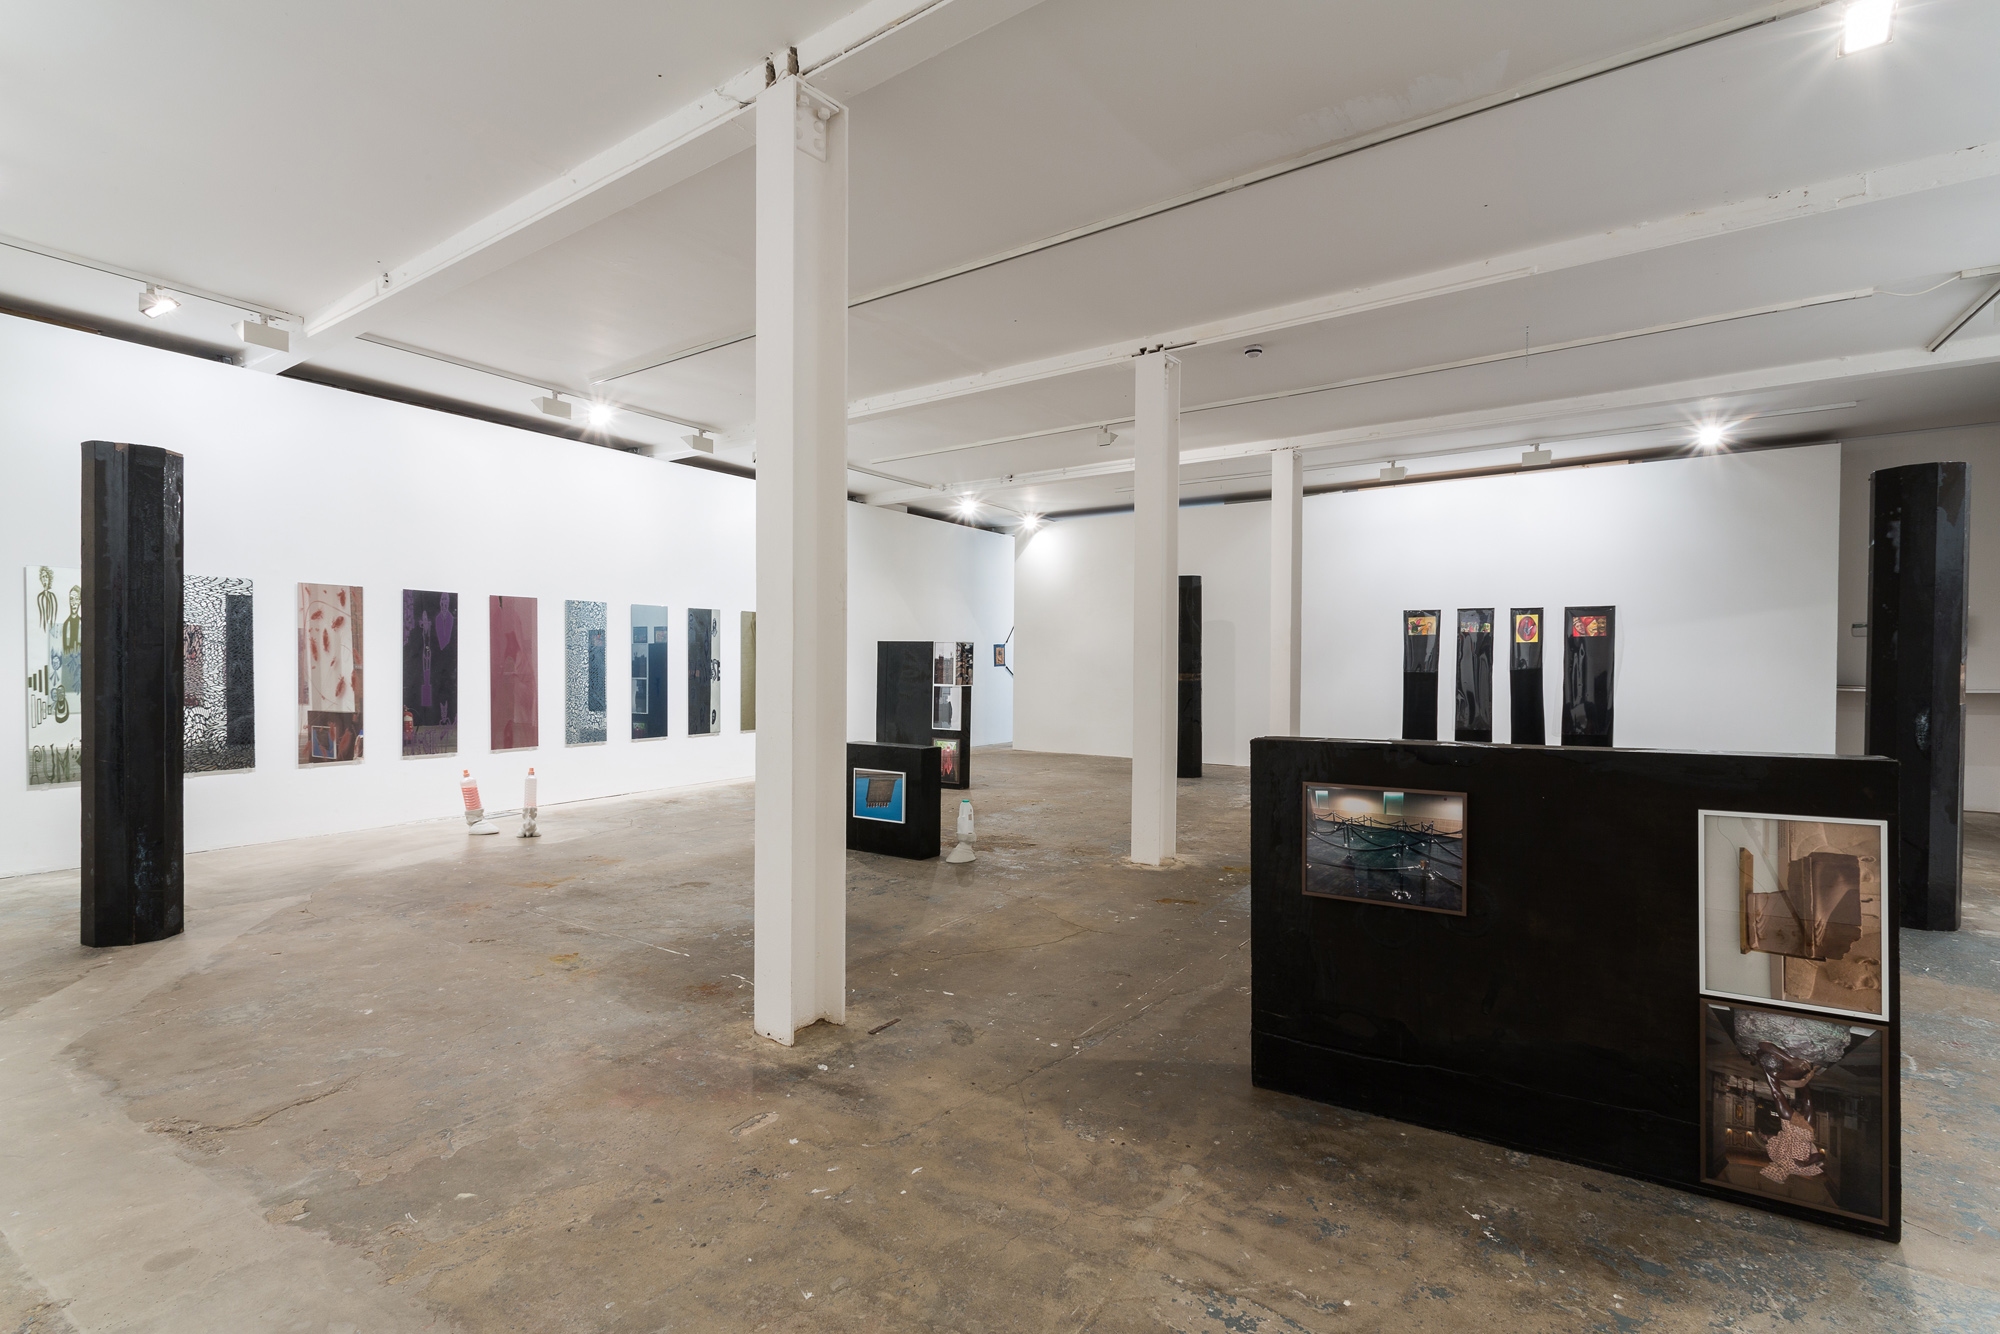 One step away from further Hell, 2015, Lena Henke and Marie Karlberg, Vilma Gold, London, installation view. One step away from further Hell
, Lena Henke and Marie Karlberg